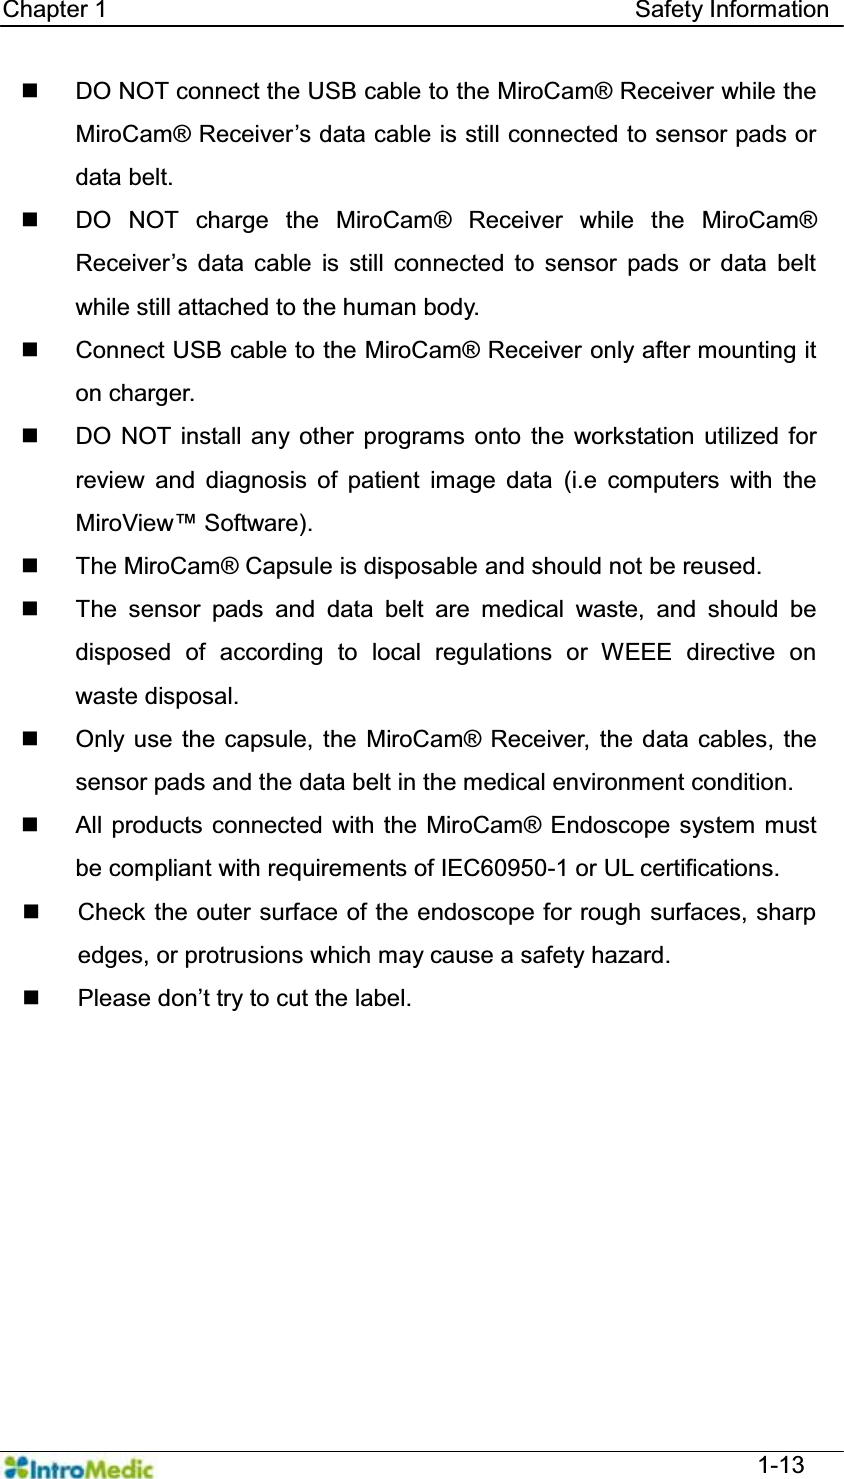   Chapter 1                                            Safety Information  1-13   DO NOT connect the USB cable to the MiroCam® Receiver while the MiroCam® Receiver¶Vdata cable is still connected to sensor pads or data belt.   DO NOT charge the MiroCam® Receiver while the MiroCam® 5HFHLYHU¶V GDWD FDEOH LV VWLOO FRQQHFWHG WR VHQVRU SDGV RU GDWDEHOWwhile still attached to the human body.    Connect USB cable to the MiroCam® Receiver only after mounting it on charger.   DO NOT install any other programs onto the workstation utilized for review and diagnosis of patient image data (i.e computers with the 0LUR9LHZ Software).   The MiroCam® Capsule is disposable and should not be reused.   The sensor pads and data belt are medical waste, and should be disposed of according to local regulations or WEEE directive on waste disposal.  Only use the capsule, the MiroCam® Receiver, the data cables, the sensor pads and the data belt in the medical environment condition.   All products connected with the MiroCam® Endoscope system must be compliant with requirements of IEC60950-1 or UL certifications.   Check the outer surface of the endoscope for rough surfaces, sharp edges, or protrusions which may cause a safety hazard.  3OHDVHGRQ¶WWU\WRFXWWKHODEHO  